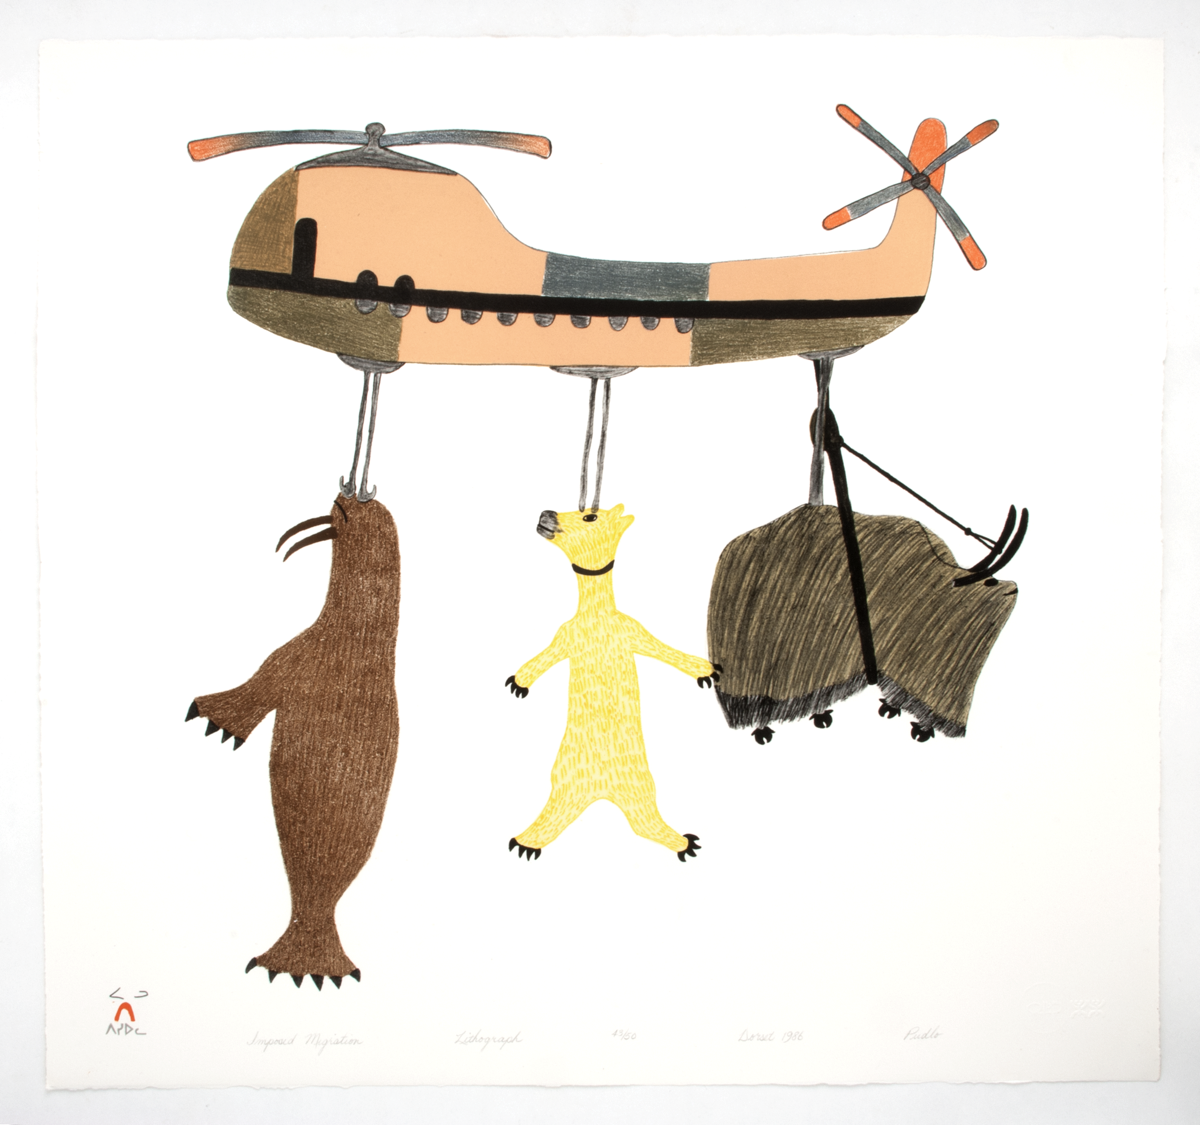 Lithograph titled 'Imposed Migration' by Pudlo Pudlat. The print shows a walrus, a polar bear, and a musk ox suspended from an orange chinook helicopter